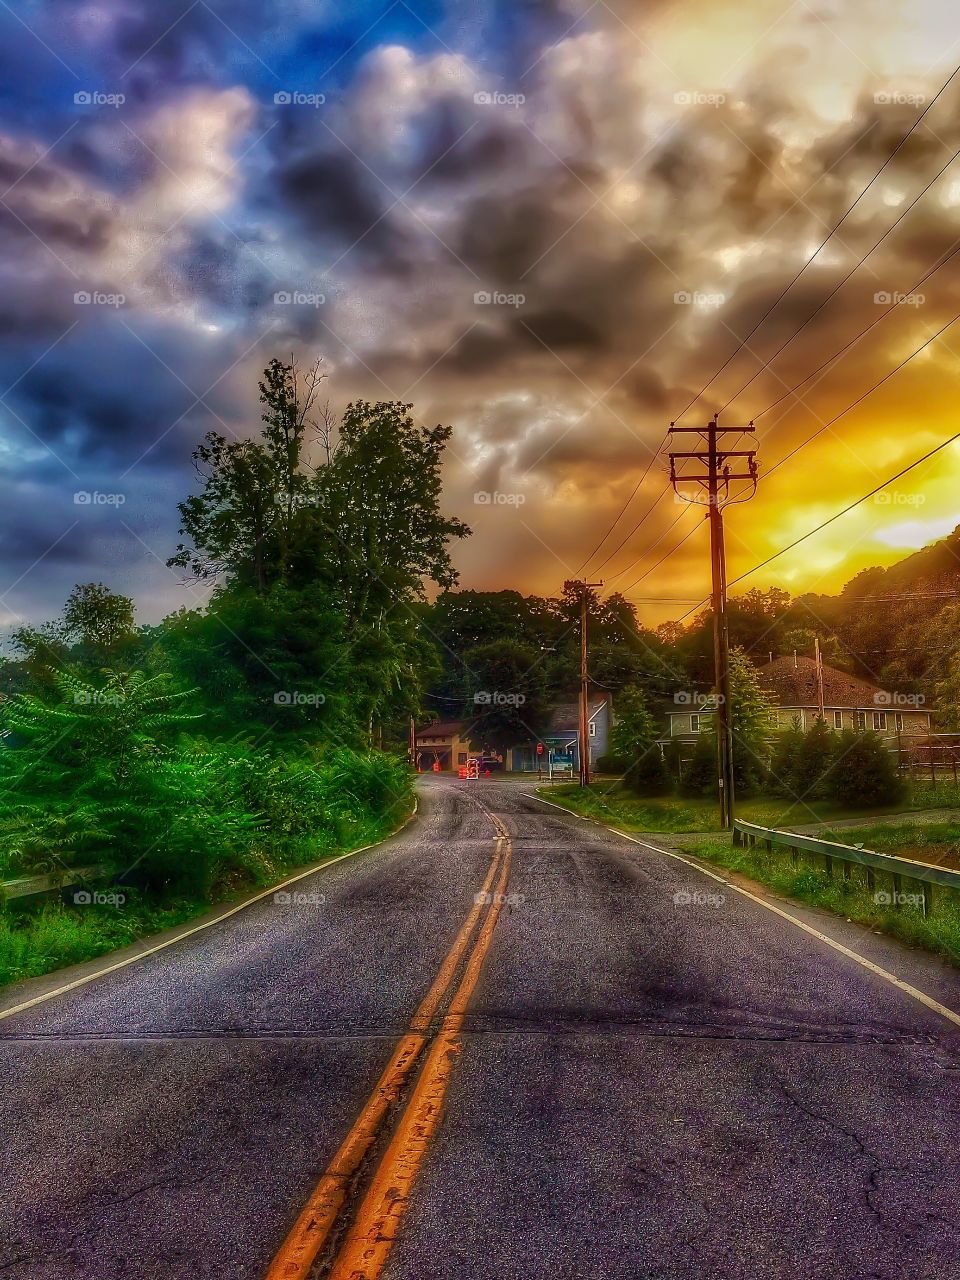 Sunrise on the street. Sunrise on a country road